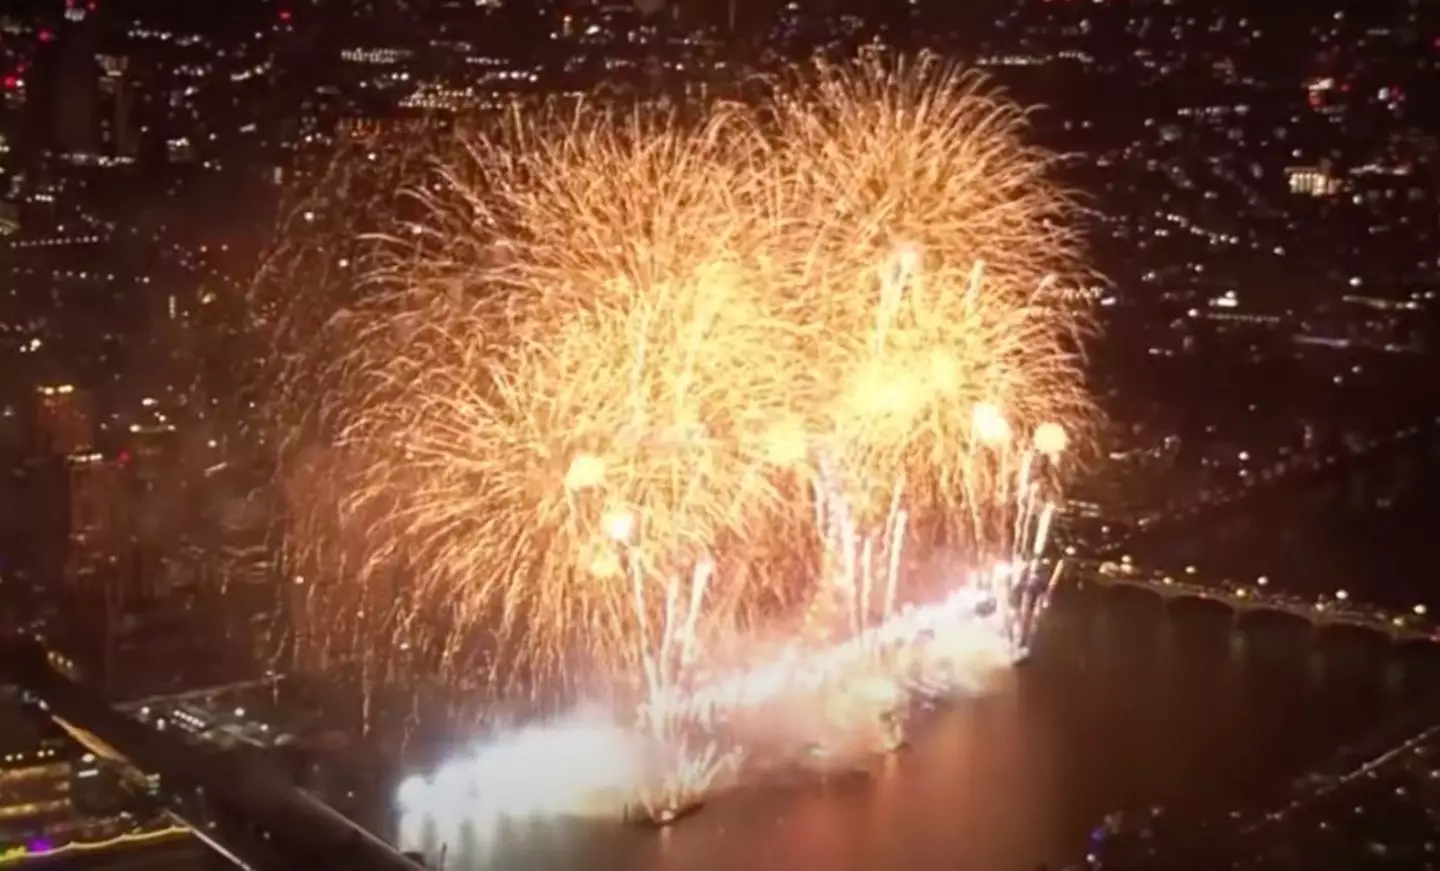 Towards the end of the incredible display was the bizarre moment that it looked like 'they’d overdone the fireworks and blown up the London Eye'.